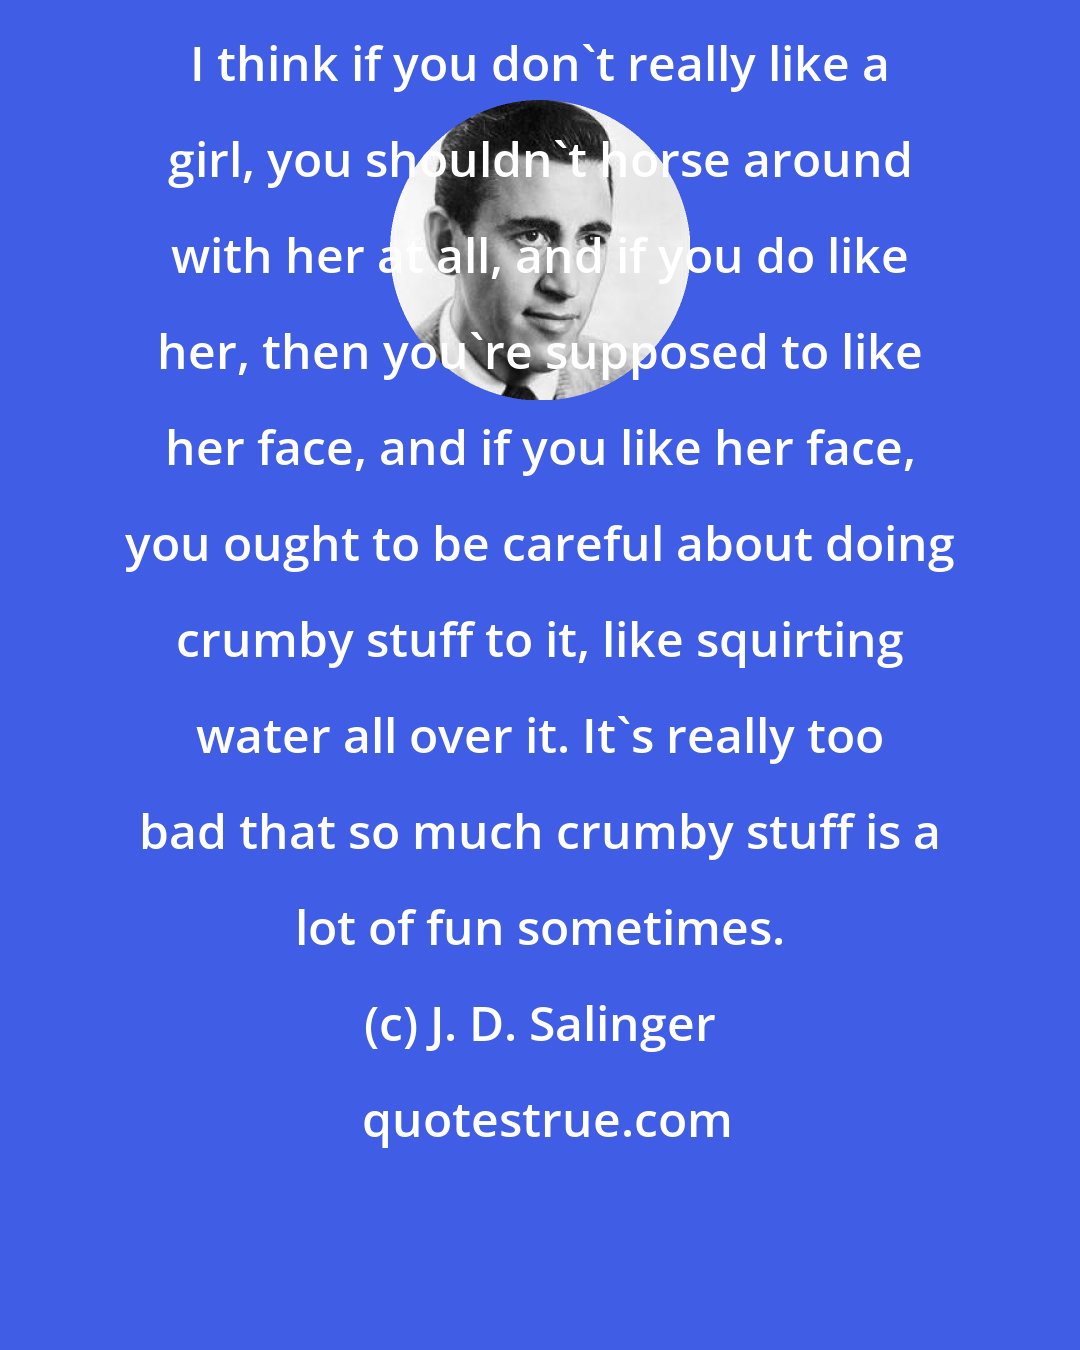 J. D. Salinger: I think if you don't really like a girl, you shouldn't horse around with her at all, and if you do like her, then you're supposed to like her face, and if you like her face, you ought to be careful about doing crumby stuff to it, like squirting water all over it. It's really too bad that so much crumby stuff is a lot of fun sometimes.